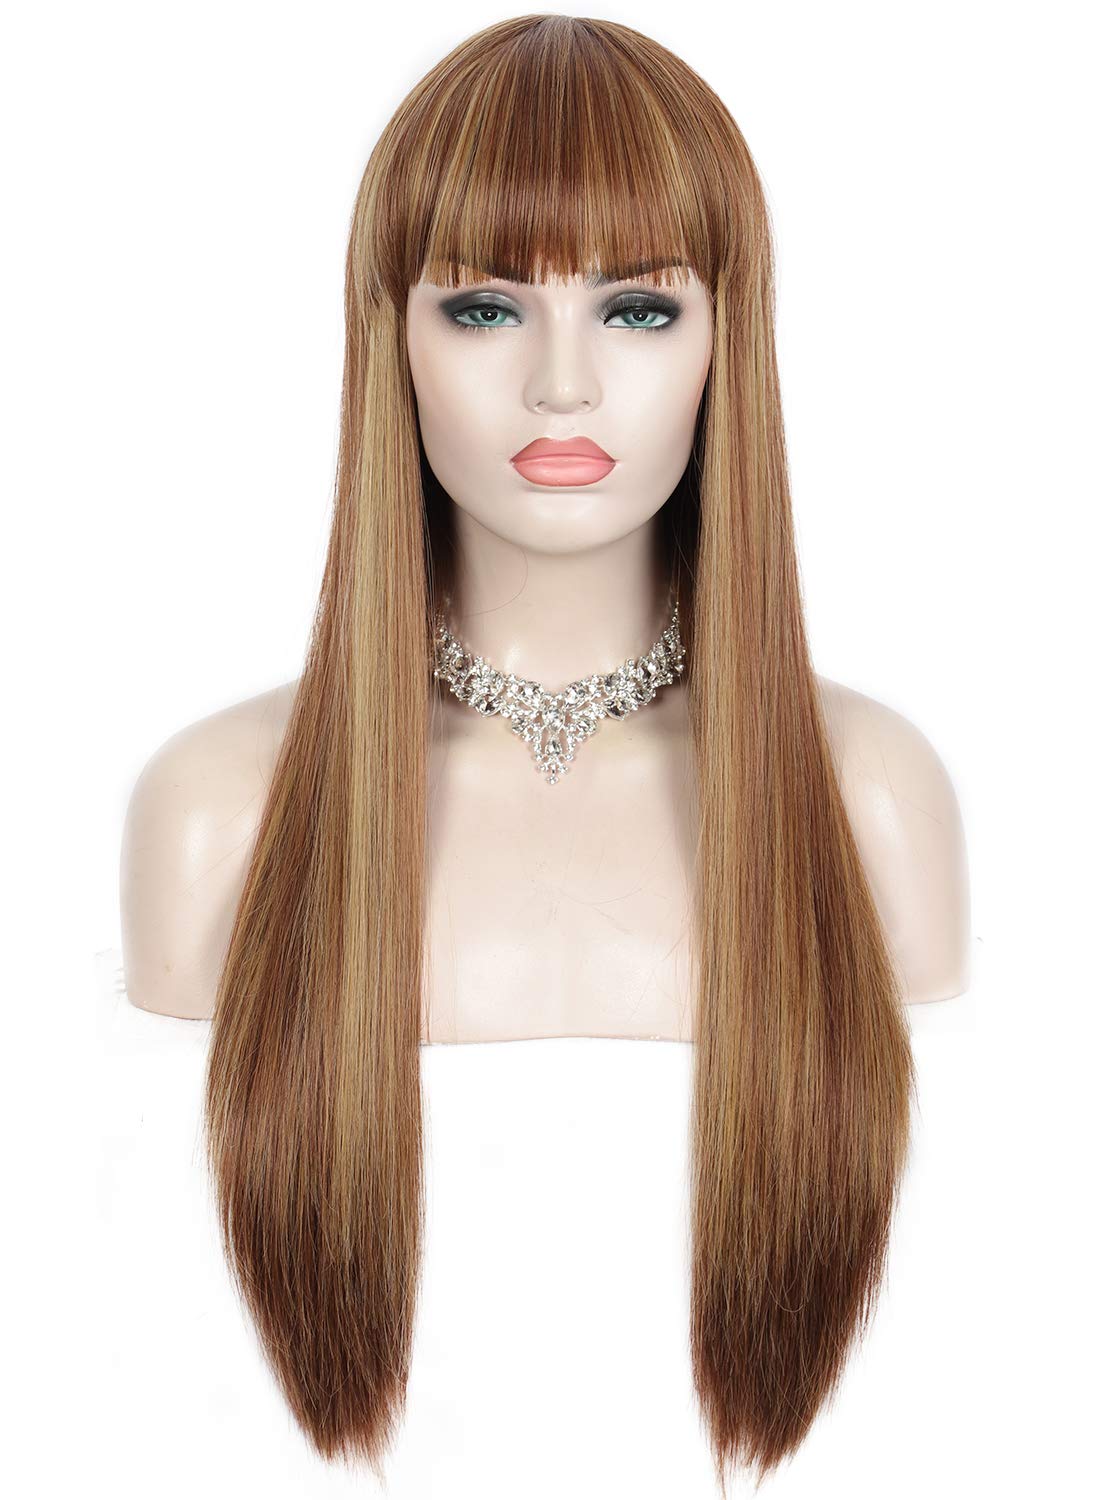 Lush Locks Long Straight Brown Highlights Wig with Bangs for Women Heat Resistant Yaki Synthetic Full Wig Natural Look 28 Inch